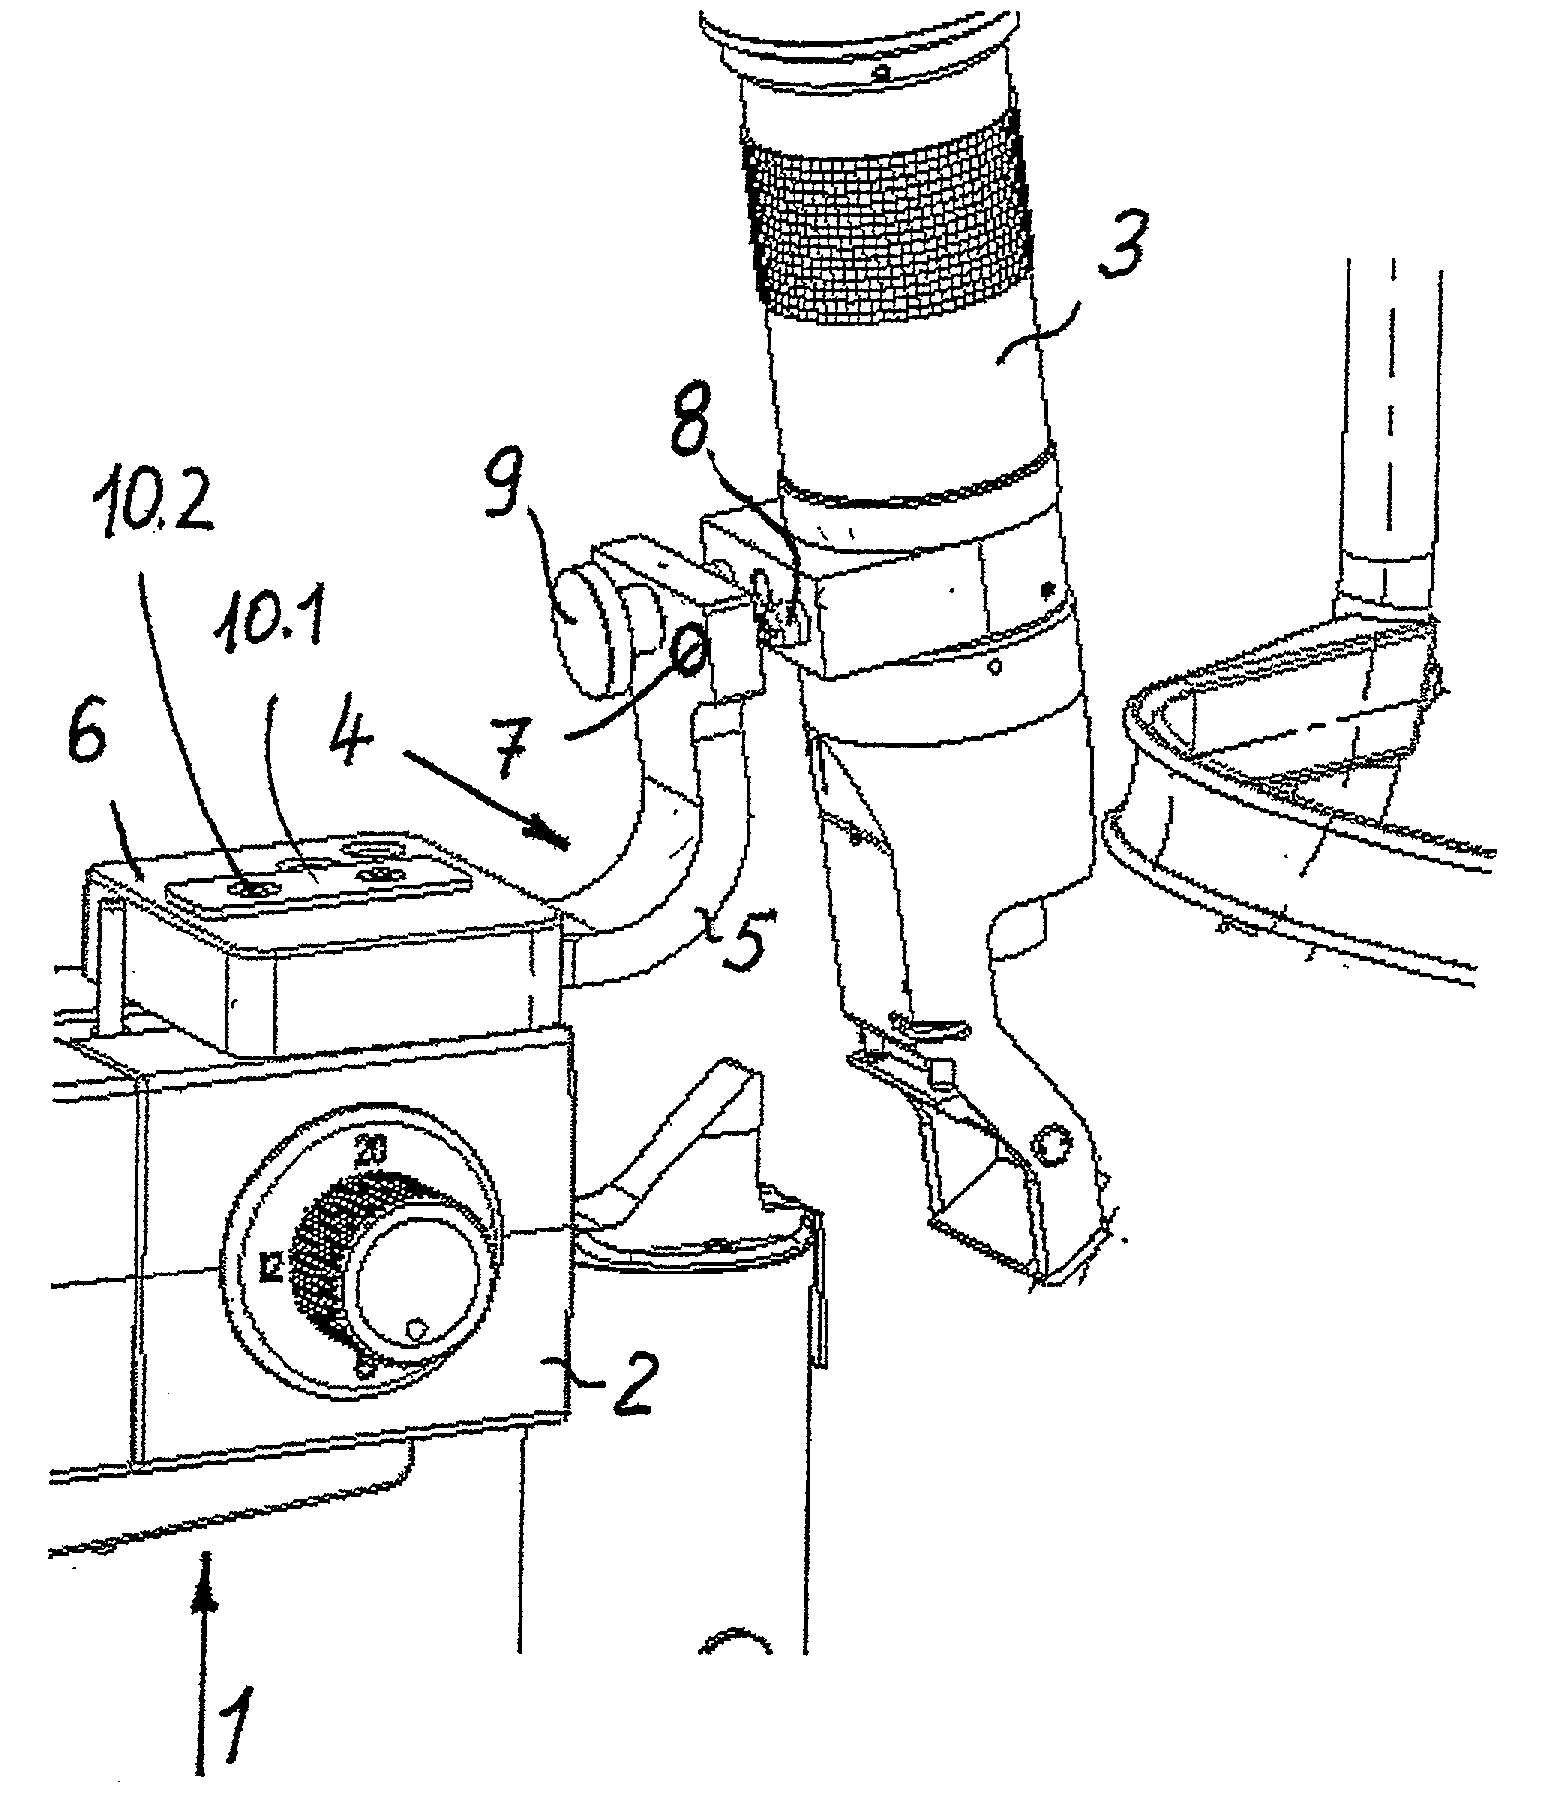 Adapter for ophthalmologic equipment